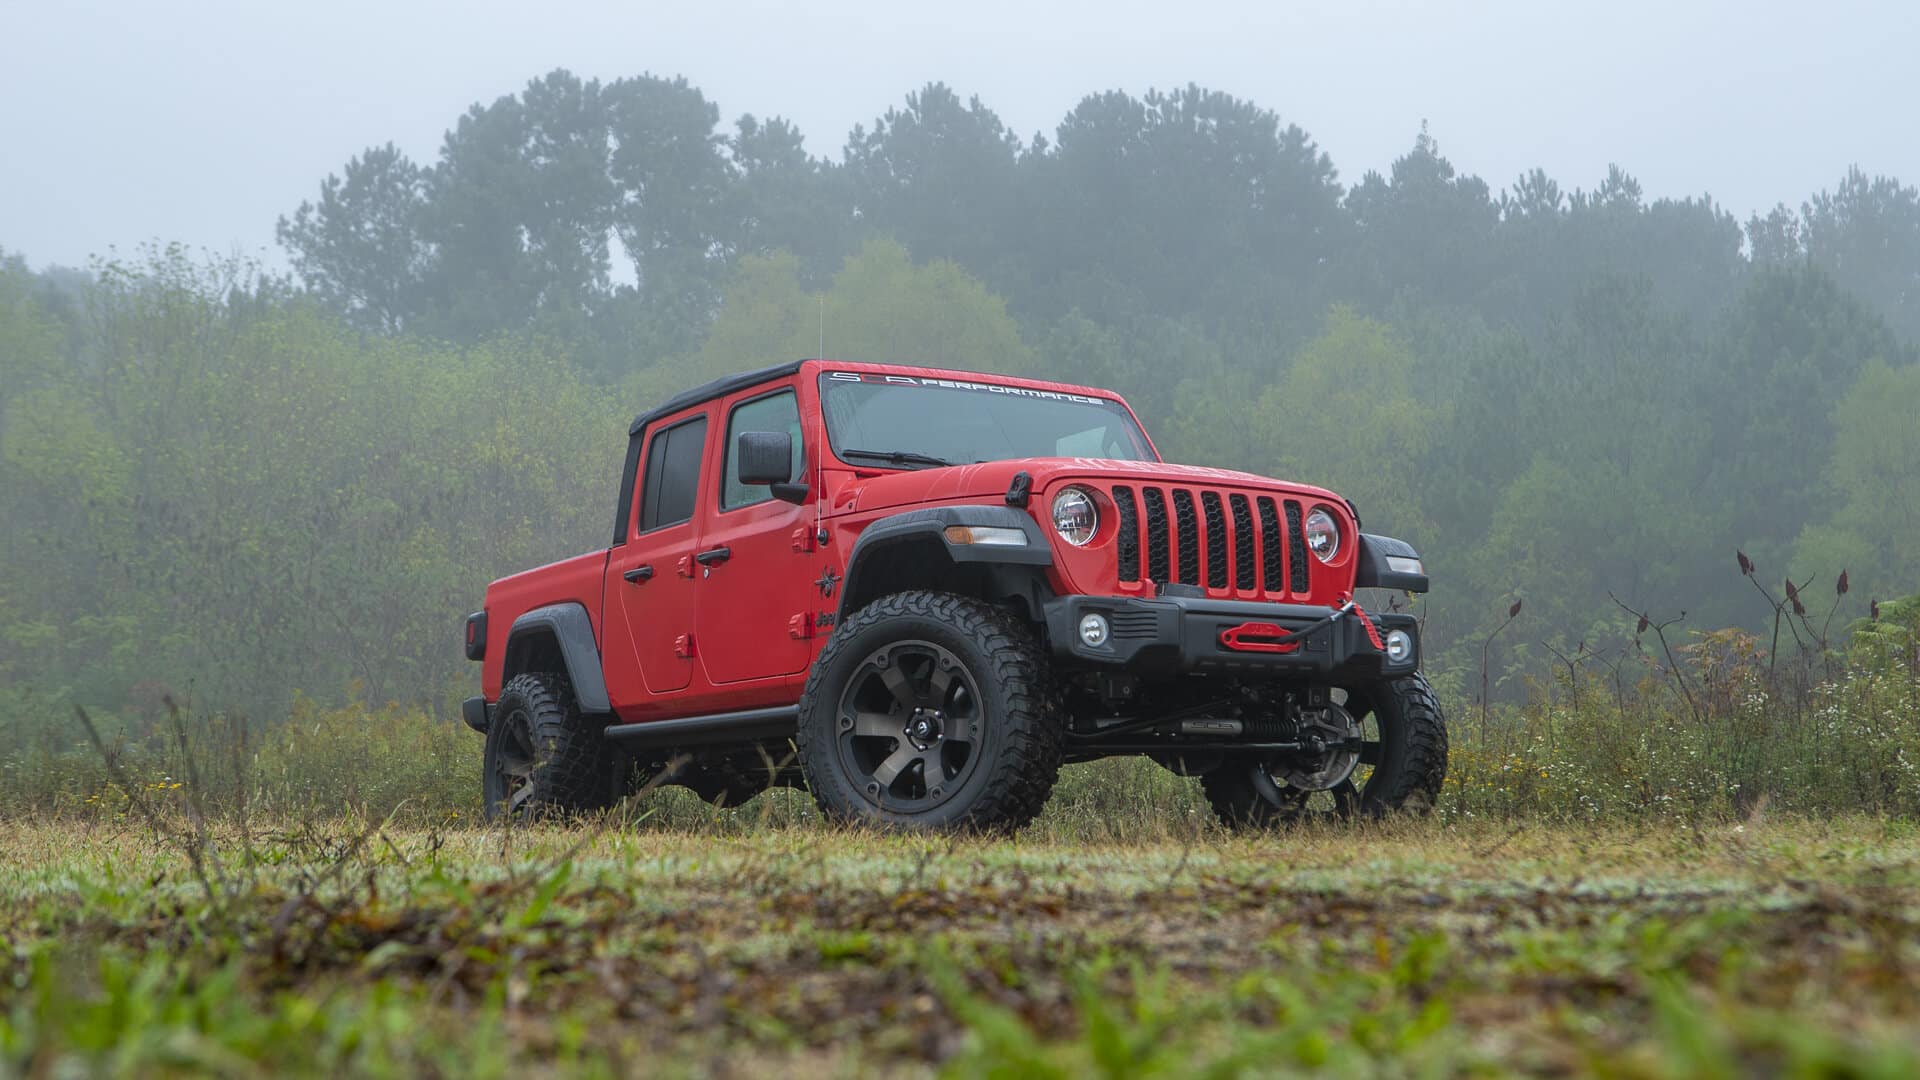 SCA Jeep Gladiator Black Widow Facing Right in Red.